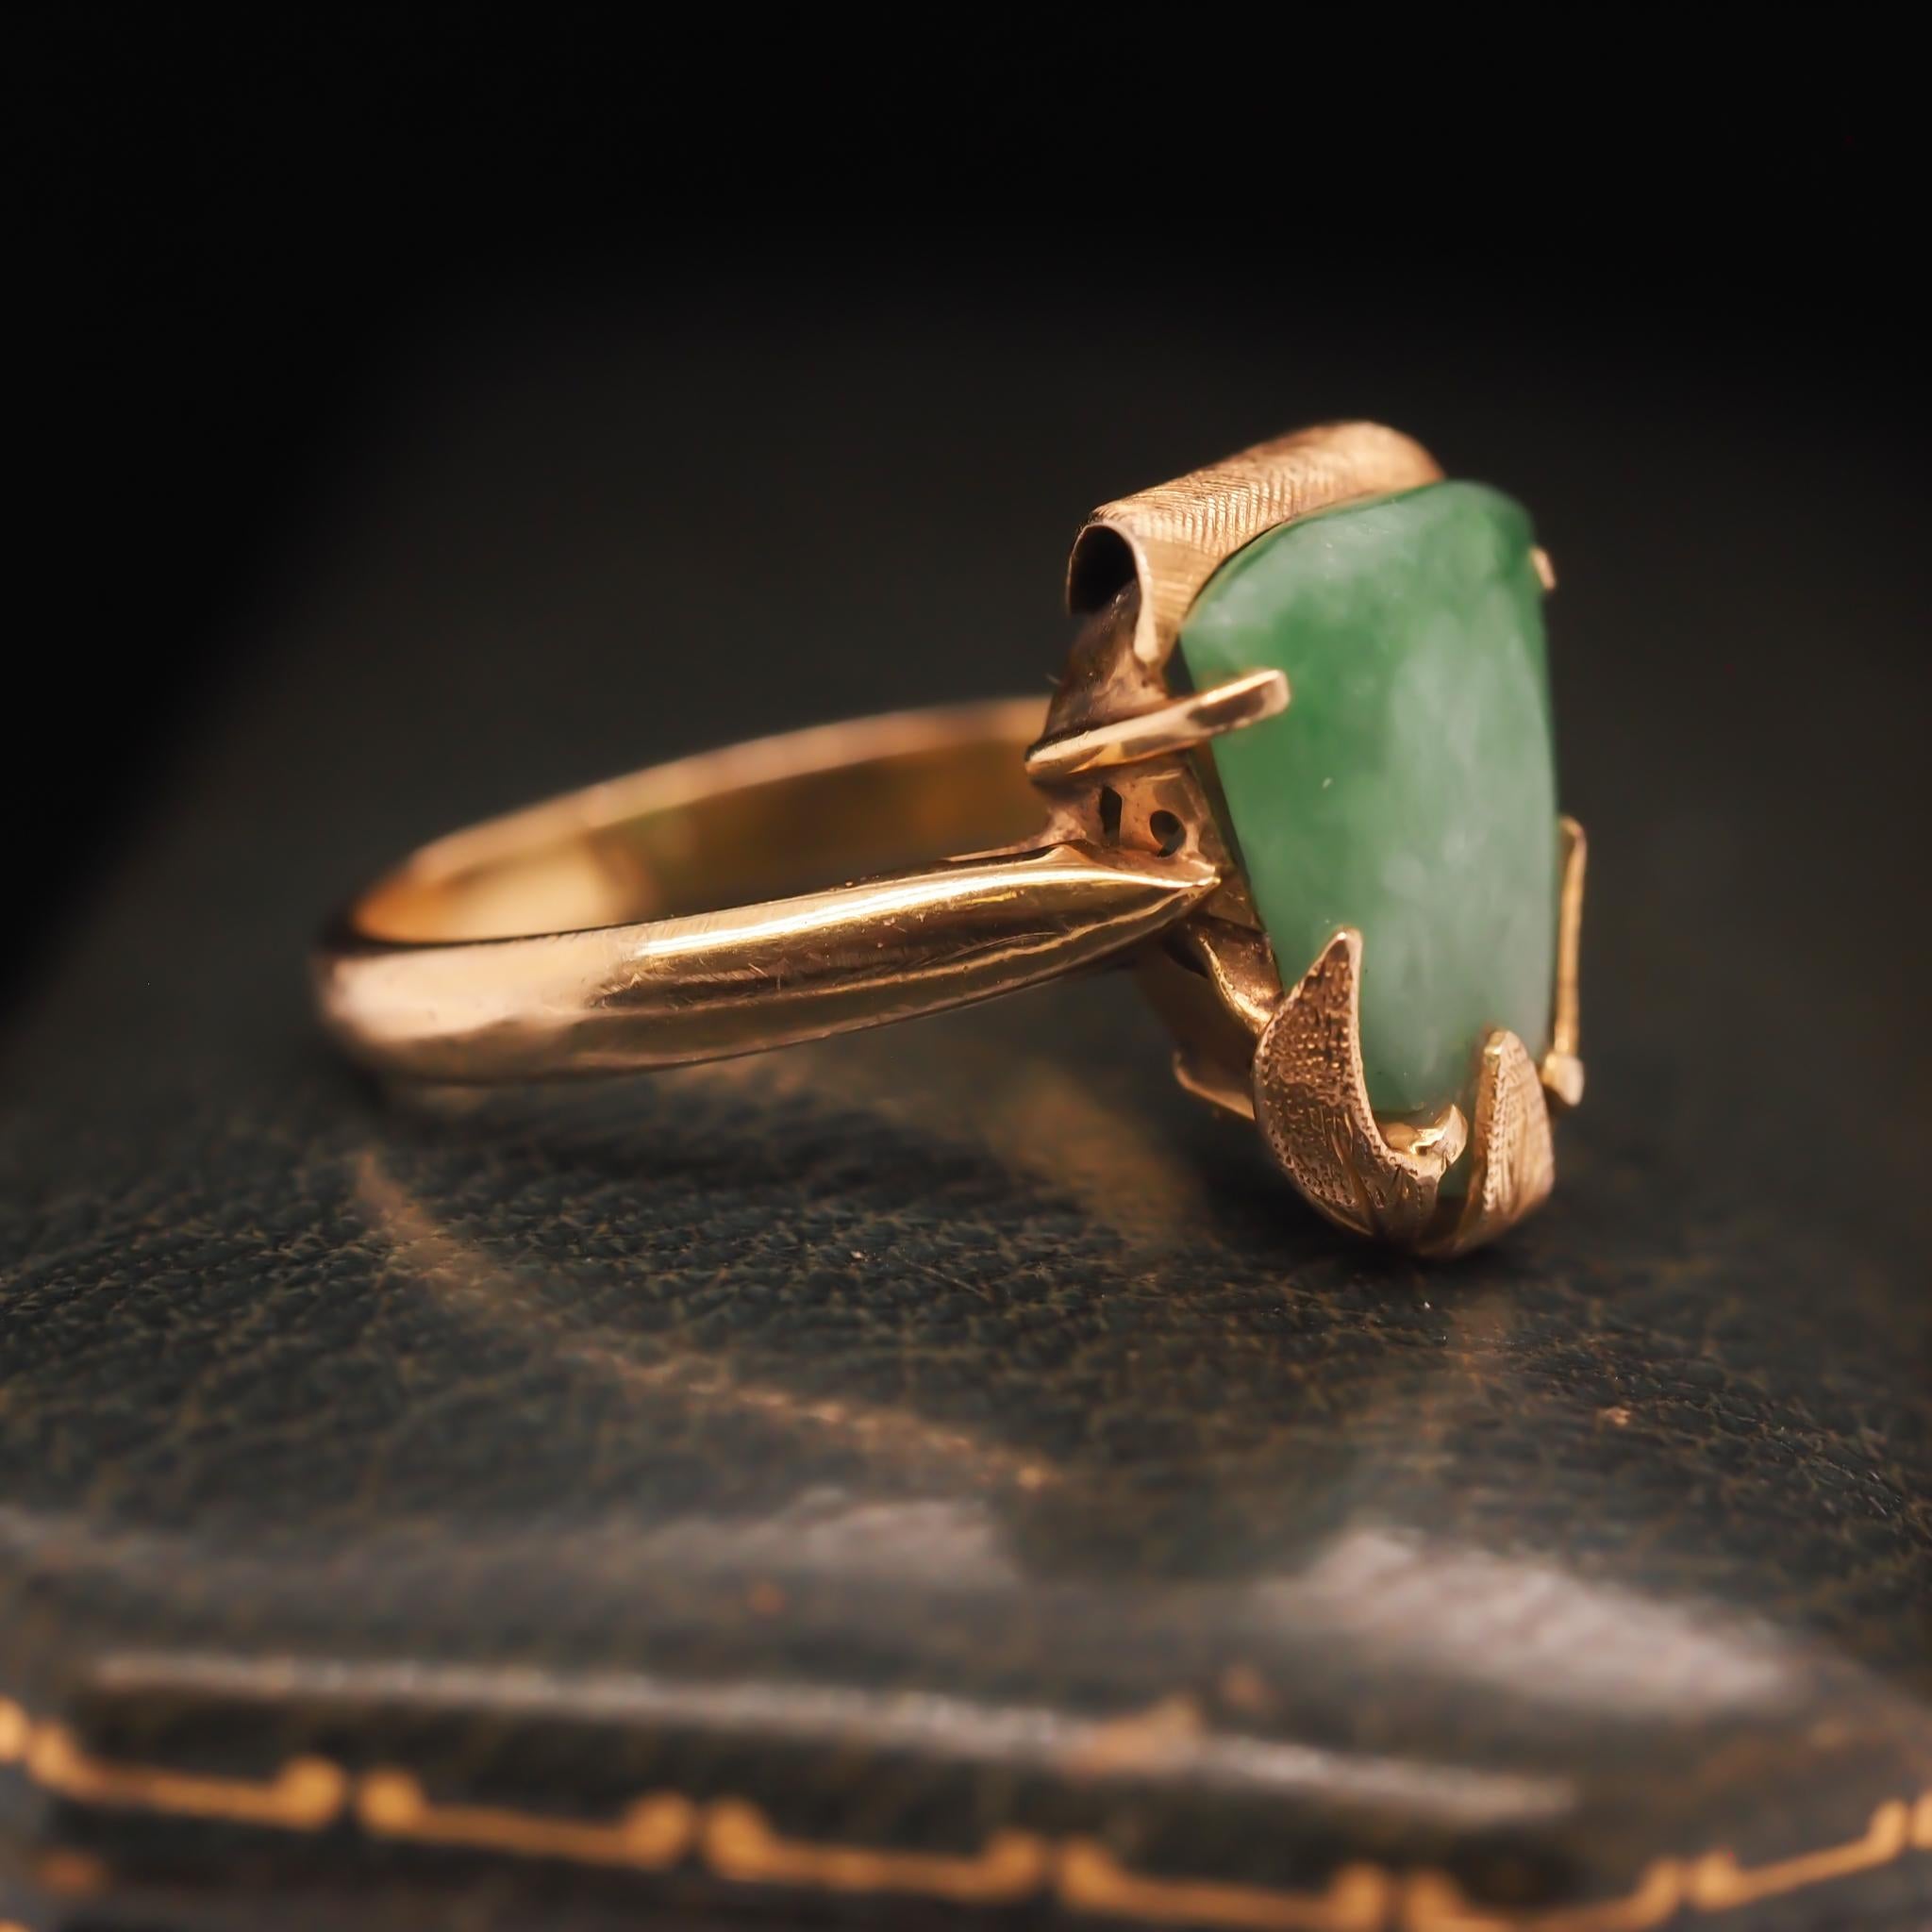 Year: 1960s
Item Details:
Ring Size: 7.25 (Sizable)
Metal Type: 14k yellow gold [Hallmarked, and Tested]
Weight: 4.2 grams
Jade Details: Green, 12x9mm approx.
Band Width: 2.7mm
Condition: Excellent
Era: Vintage